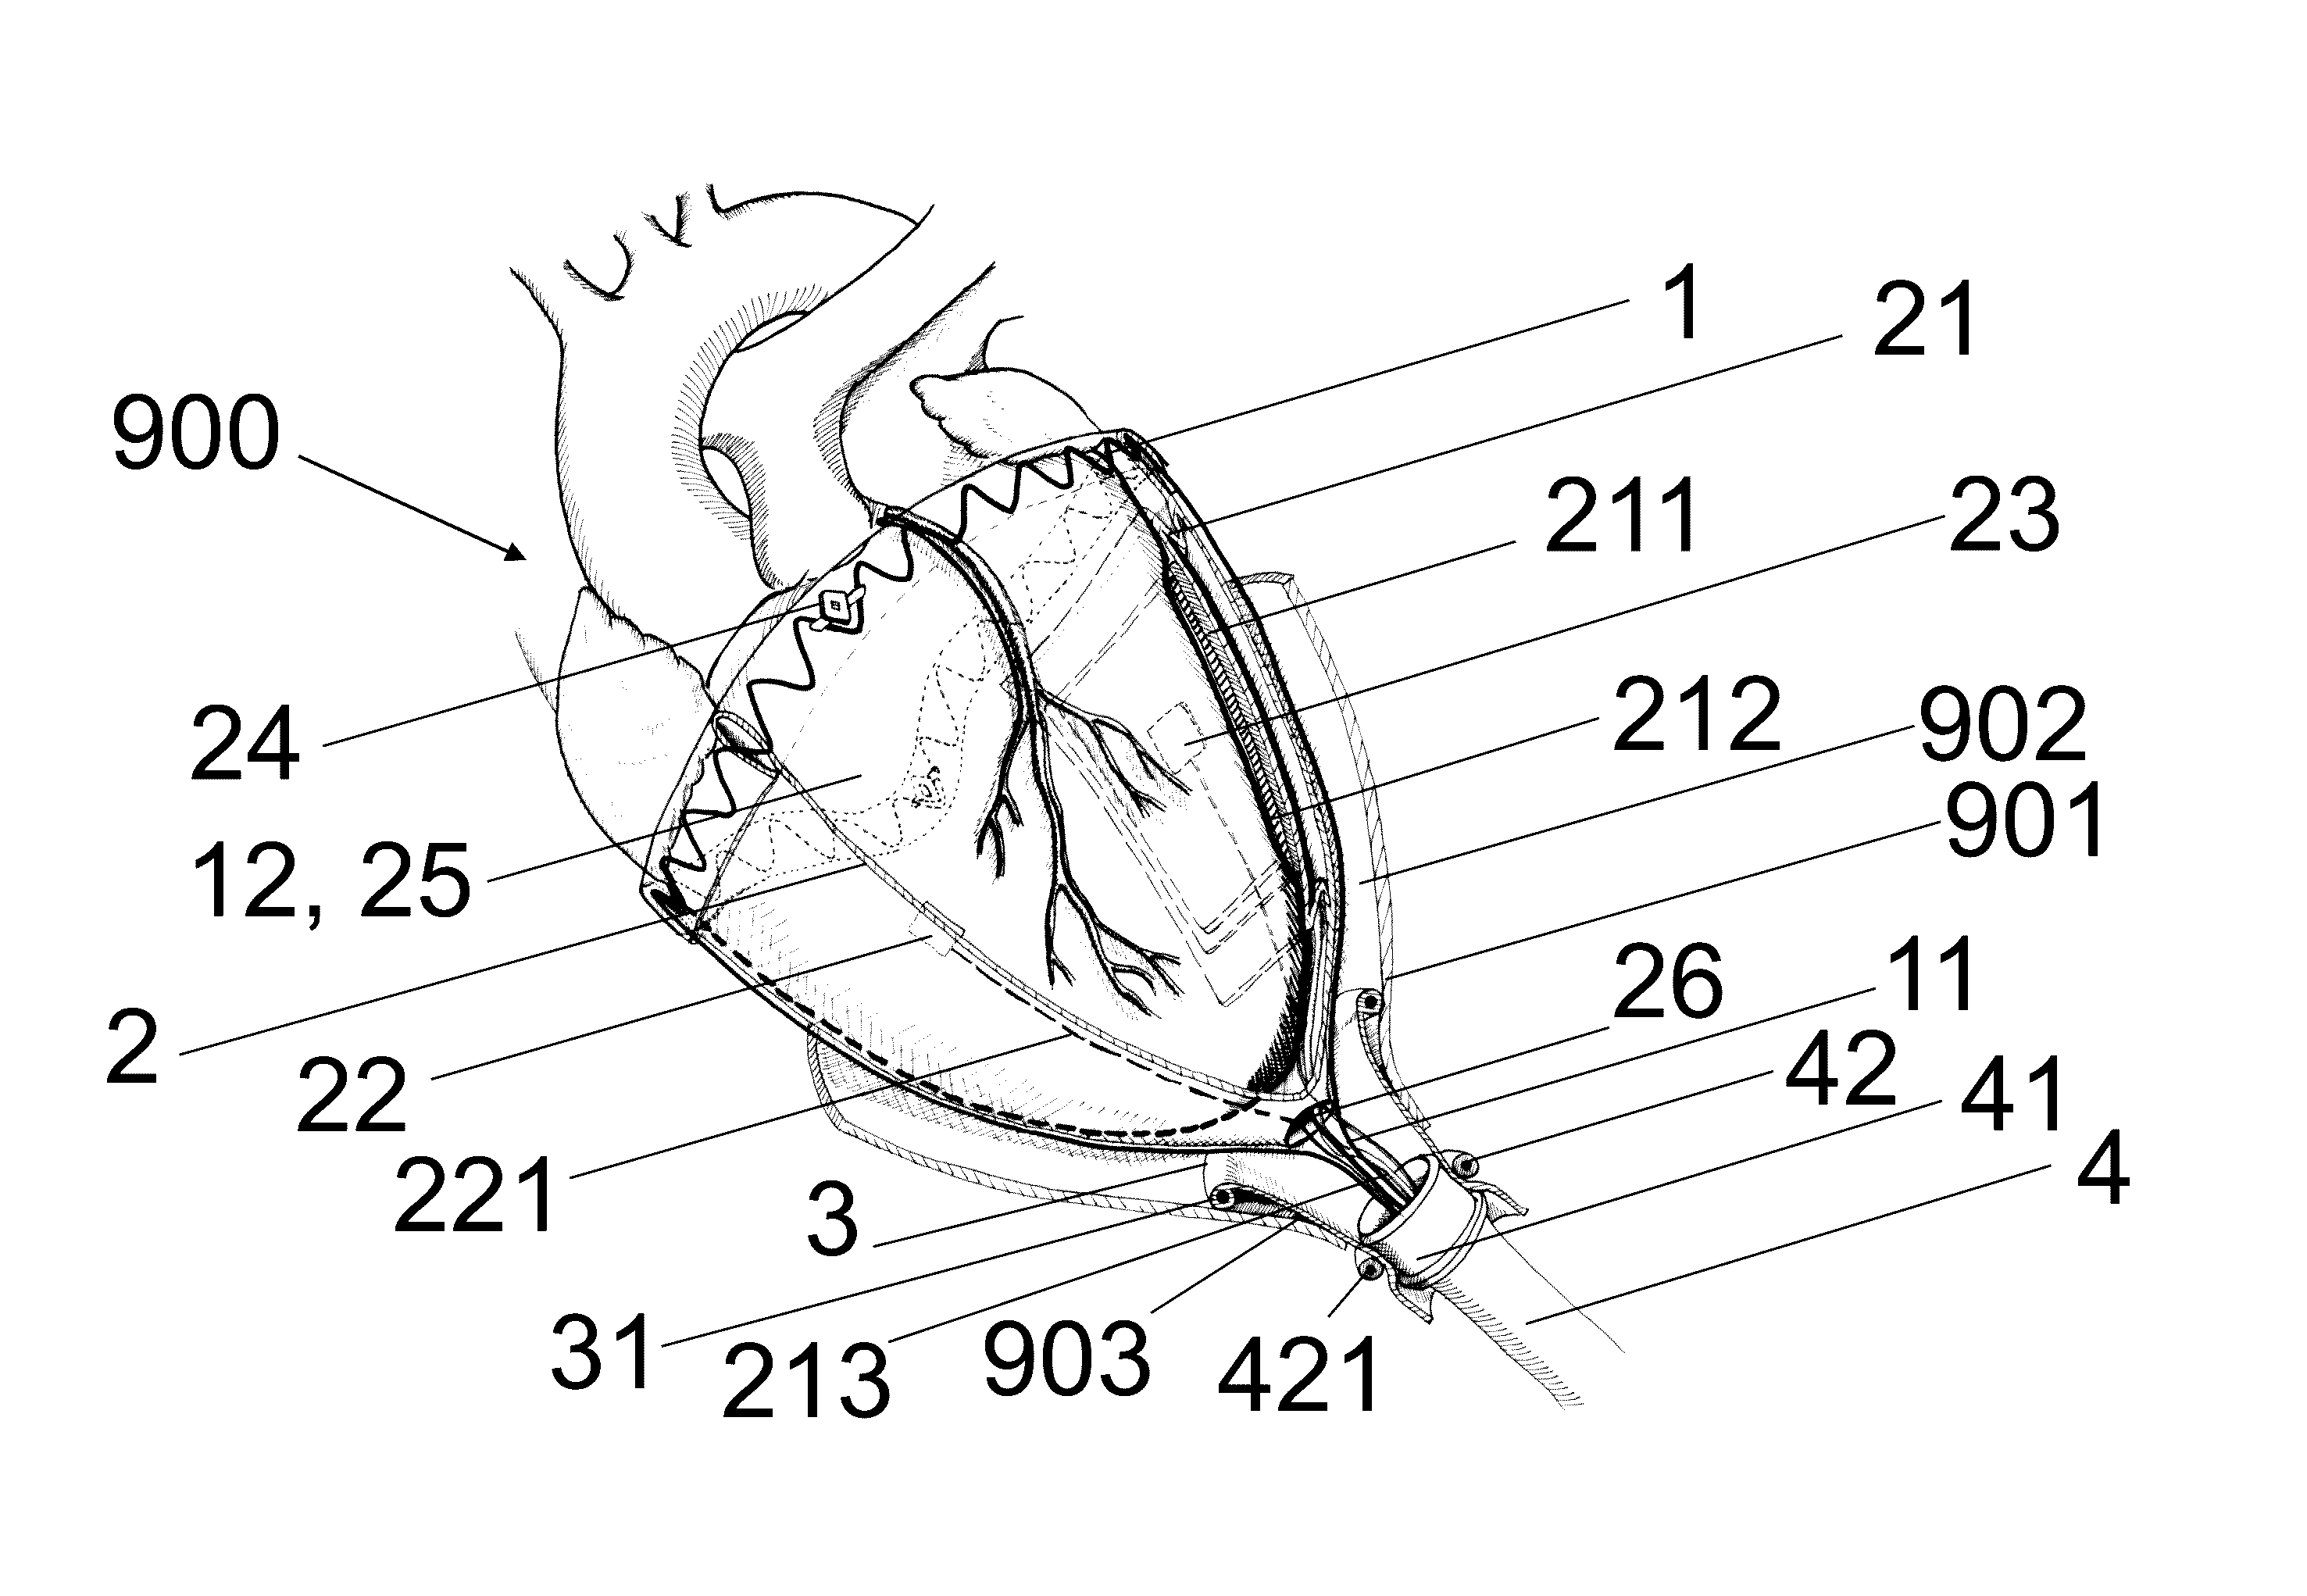 Implantable device for the locationally accurate delivery and administration of substances into the pericardium or onto the surface of the heart